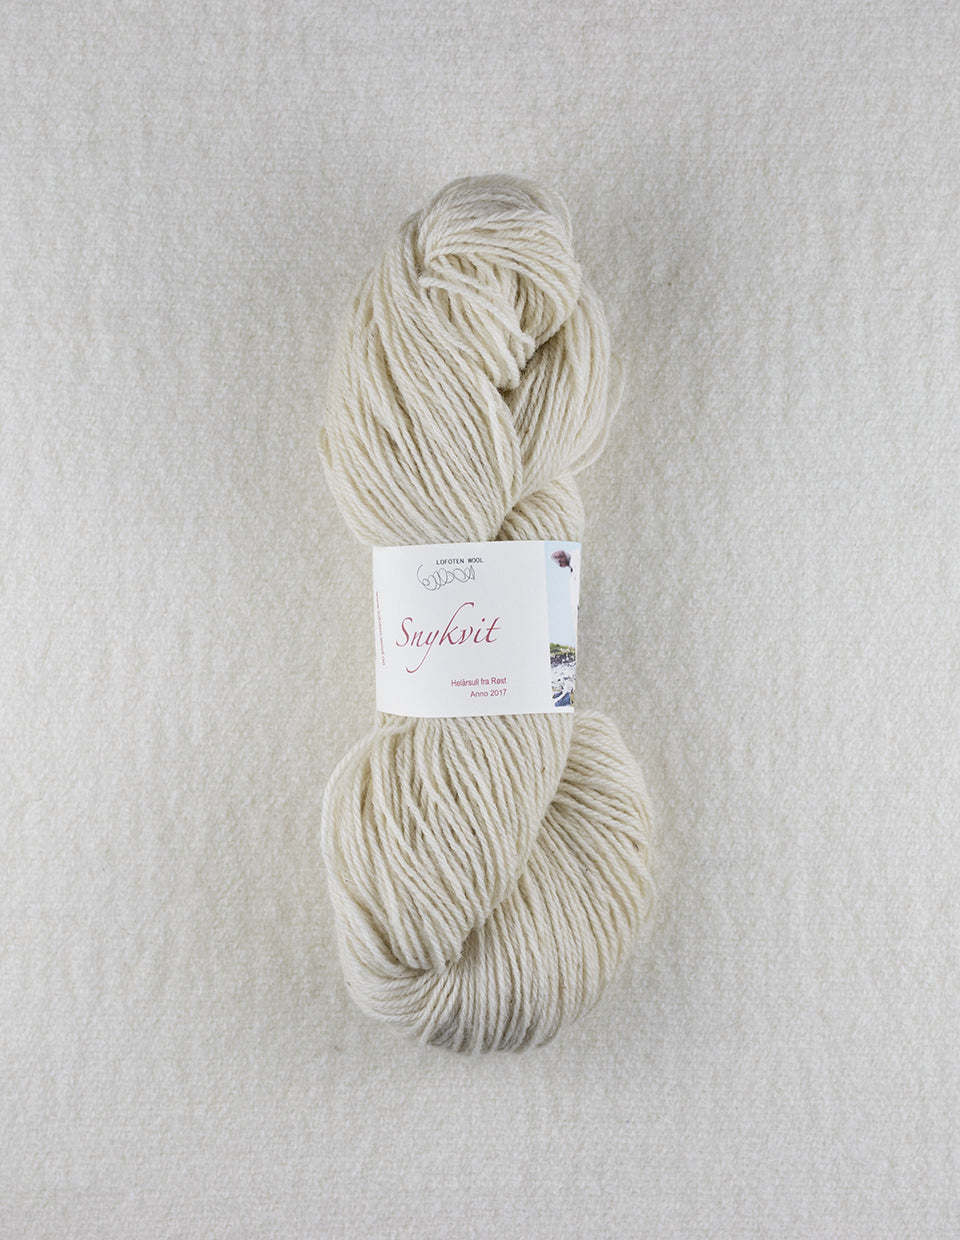 Markens Grøde (The Growth of the Field) 3 ply plant dyed knitting kit